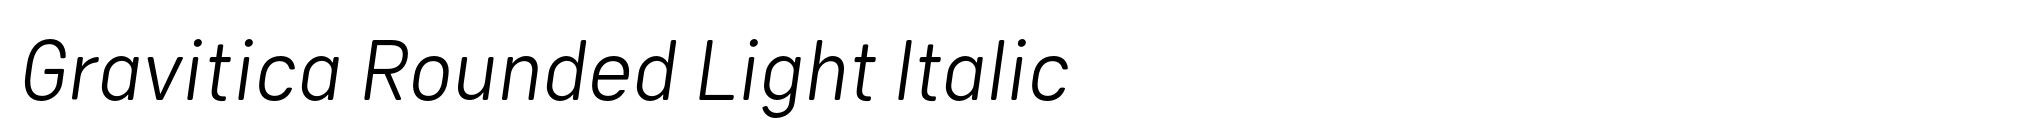 Gravitica Rounded Light Italic image